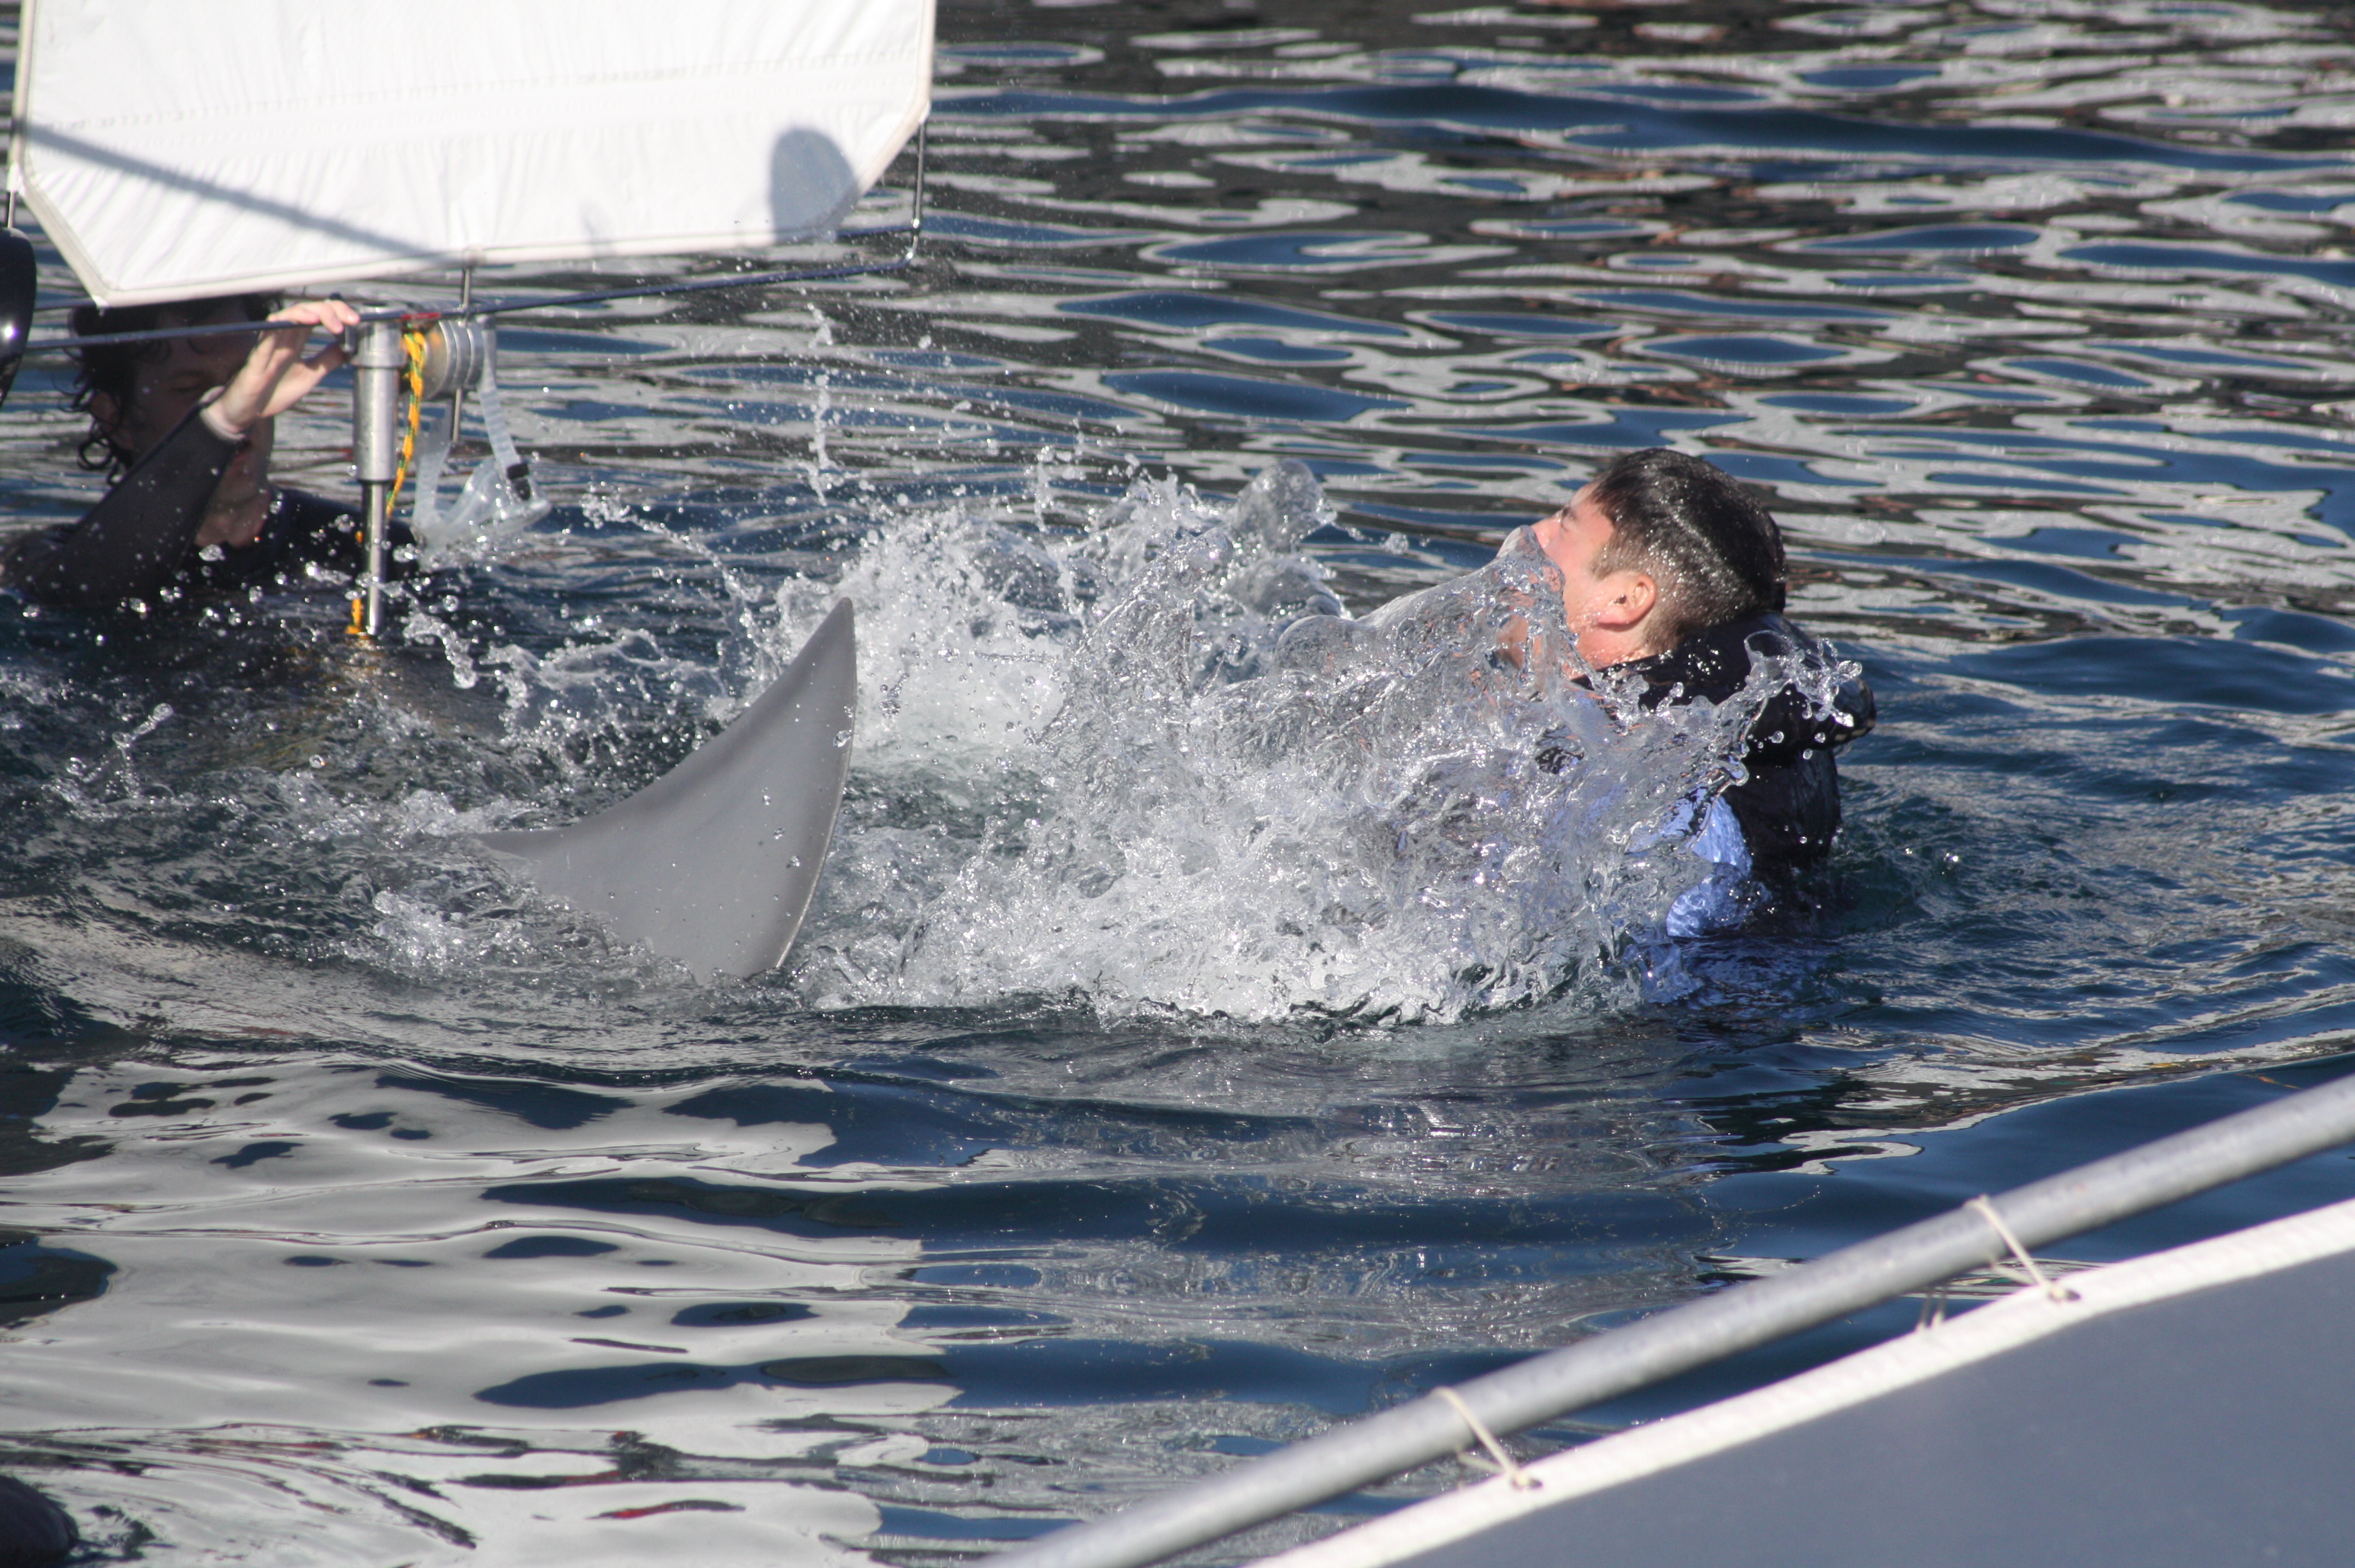 Actor Rich Handley is attacked by killer great white in the film, Indianapolis.